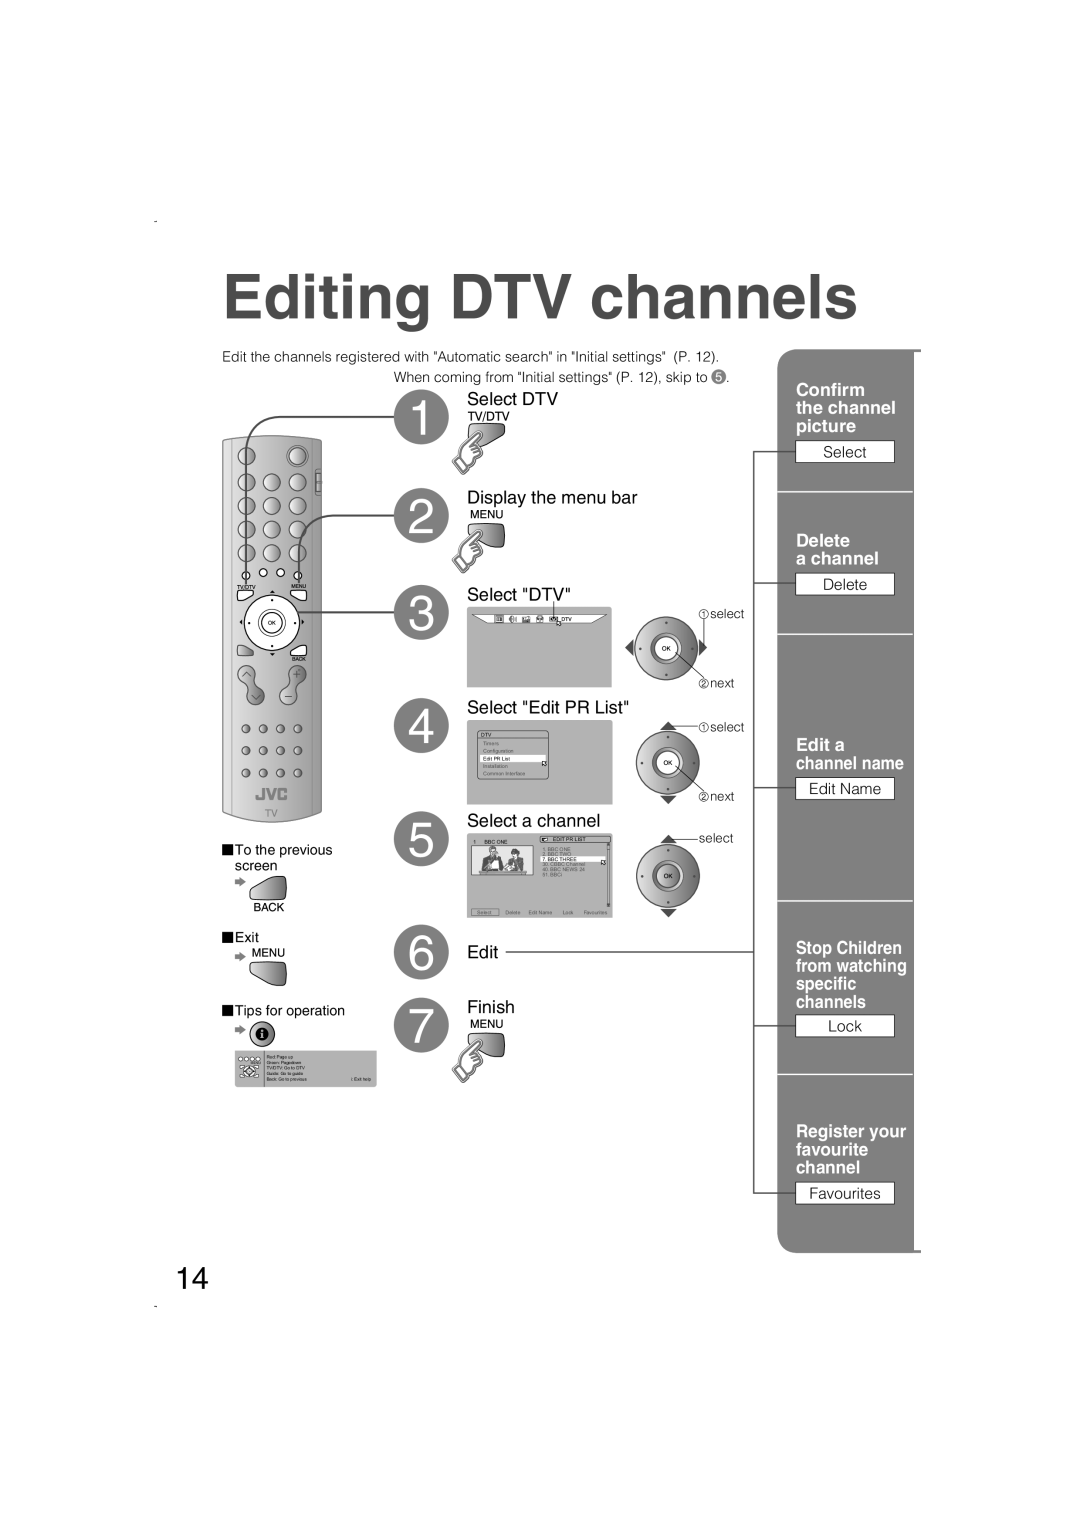 JVC LCT1847-001B-U Editing DTV channels, Select DTV, Display the menu bar, Select Edit PR List, Select a channel, Finish 